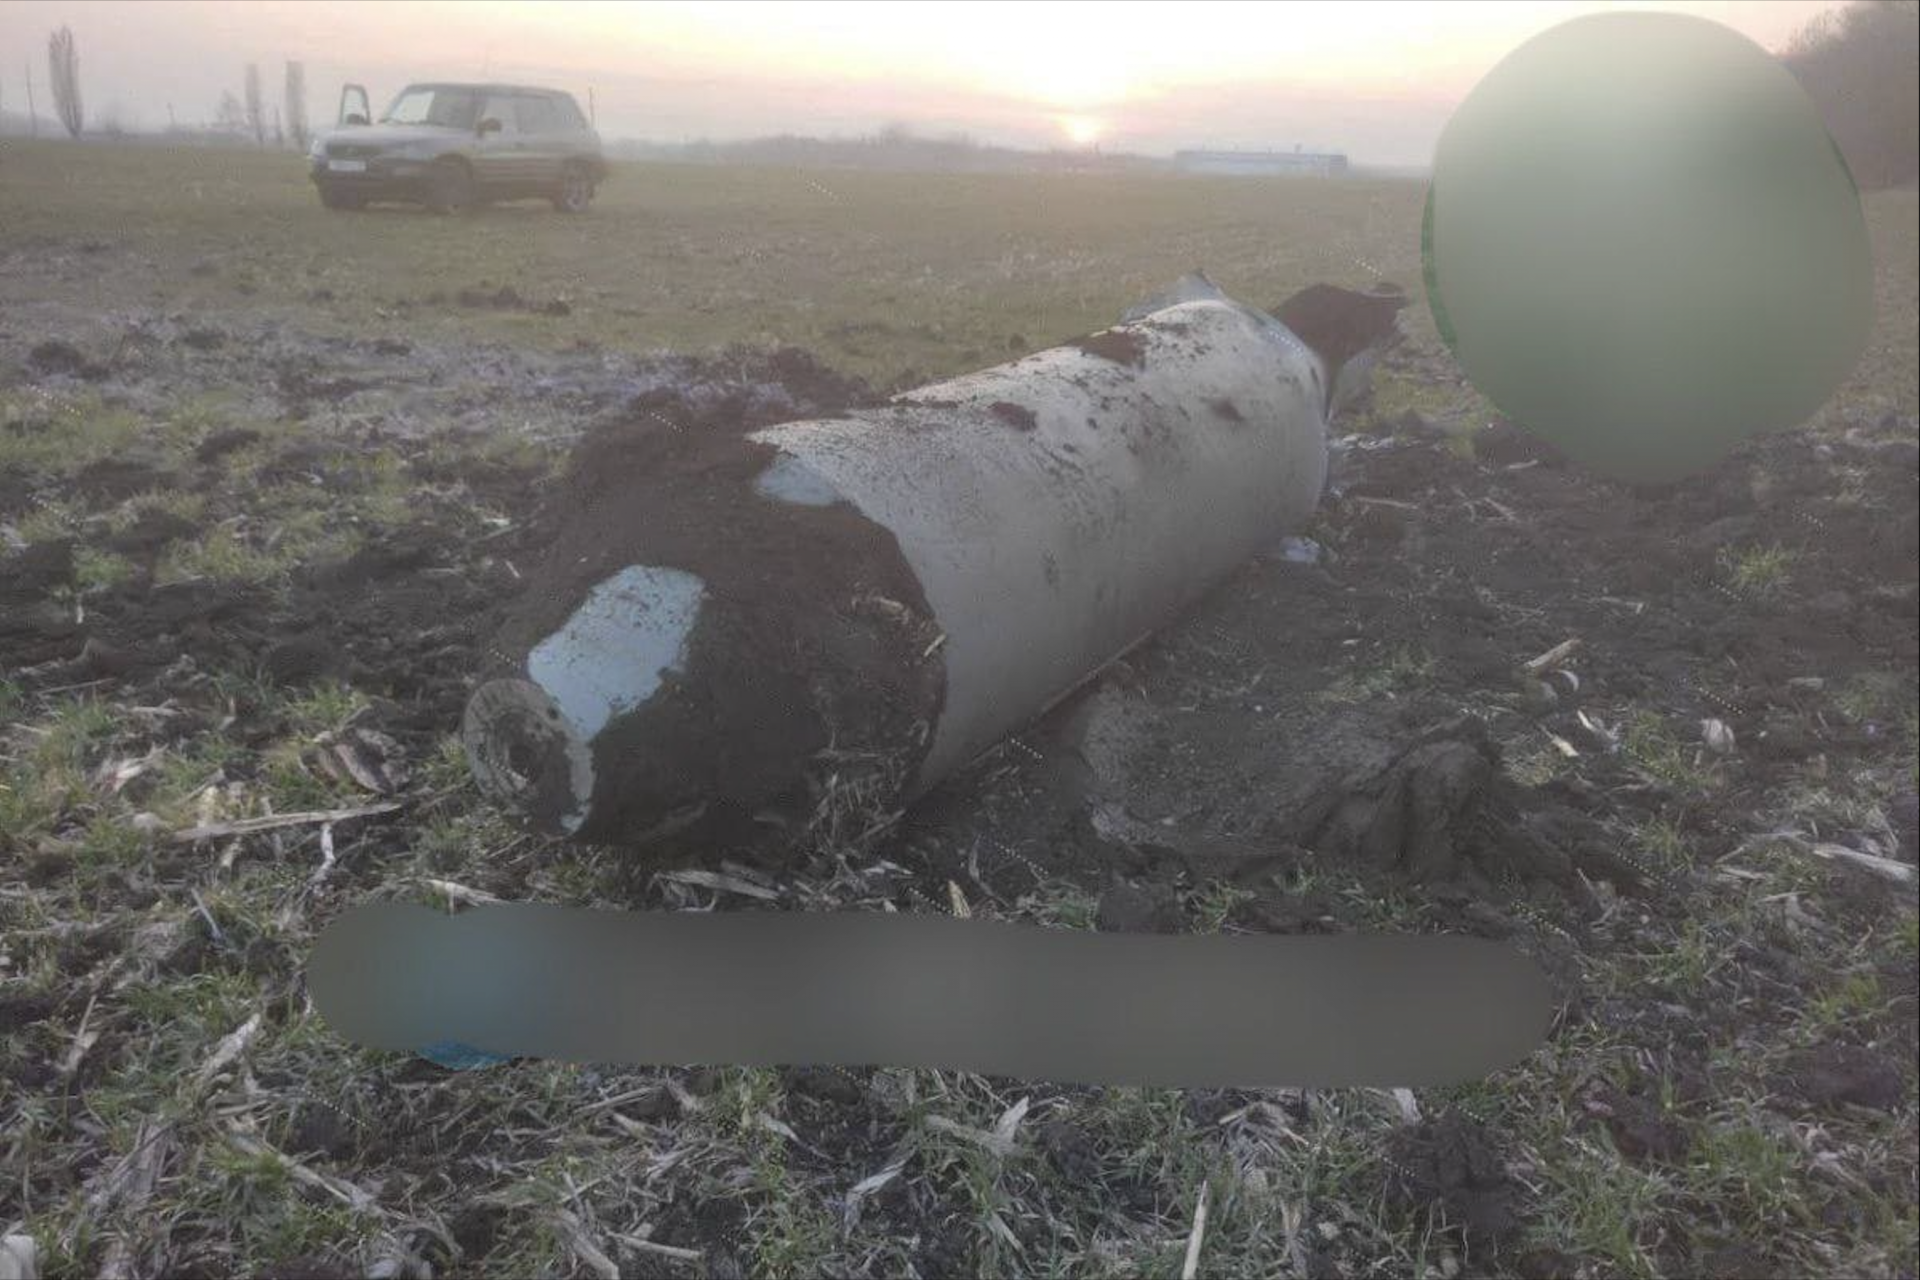 <p><span>On May 16th, Astra reported that 8 FAB glide bombs had been dropped in the Belgorod region with bombs of varying sizes being discovered across several settlements, though none of the bombs had detonated. </span></p> <div class="css-146c3p1 r-dnmrzs r-1udh08x r-3s2u2q r-bcqeeo r-1ttztb7 r-qvutc0 r-37j5jr r-a023e6 r-rjixqe r-16dba41 r-18u37iz r-1wvb978"><span>Photo Credit: X @front_ukrainian</span></div>